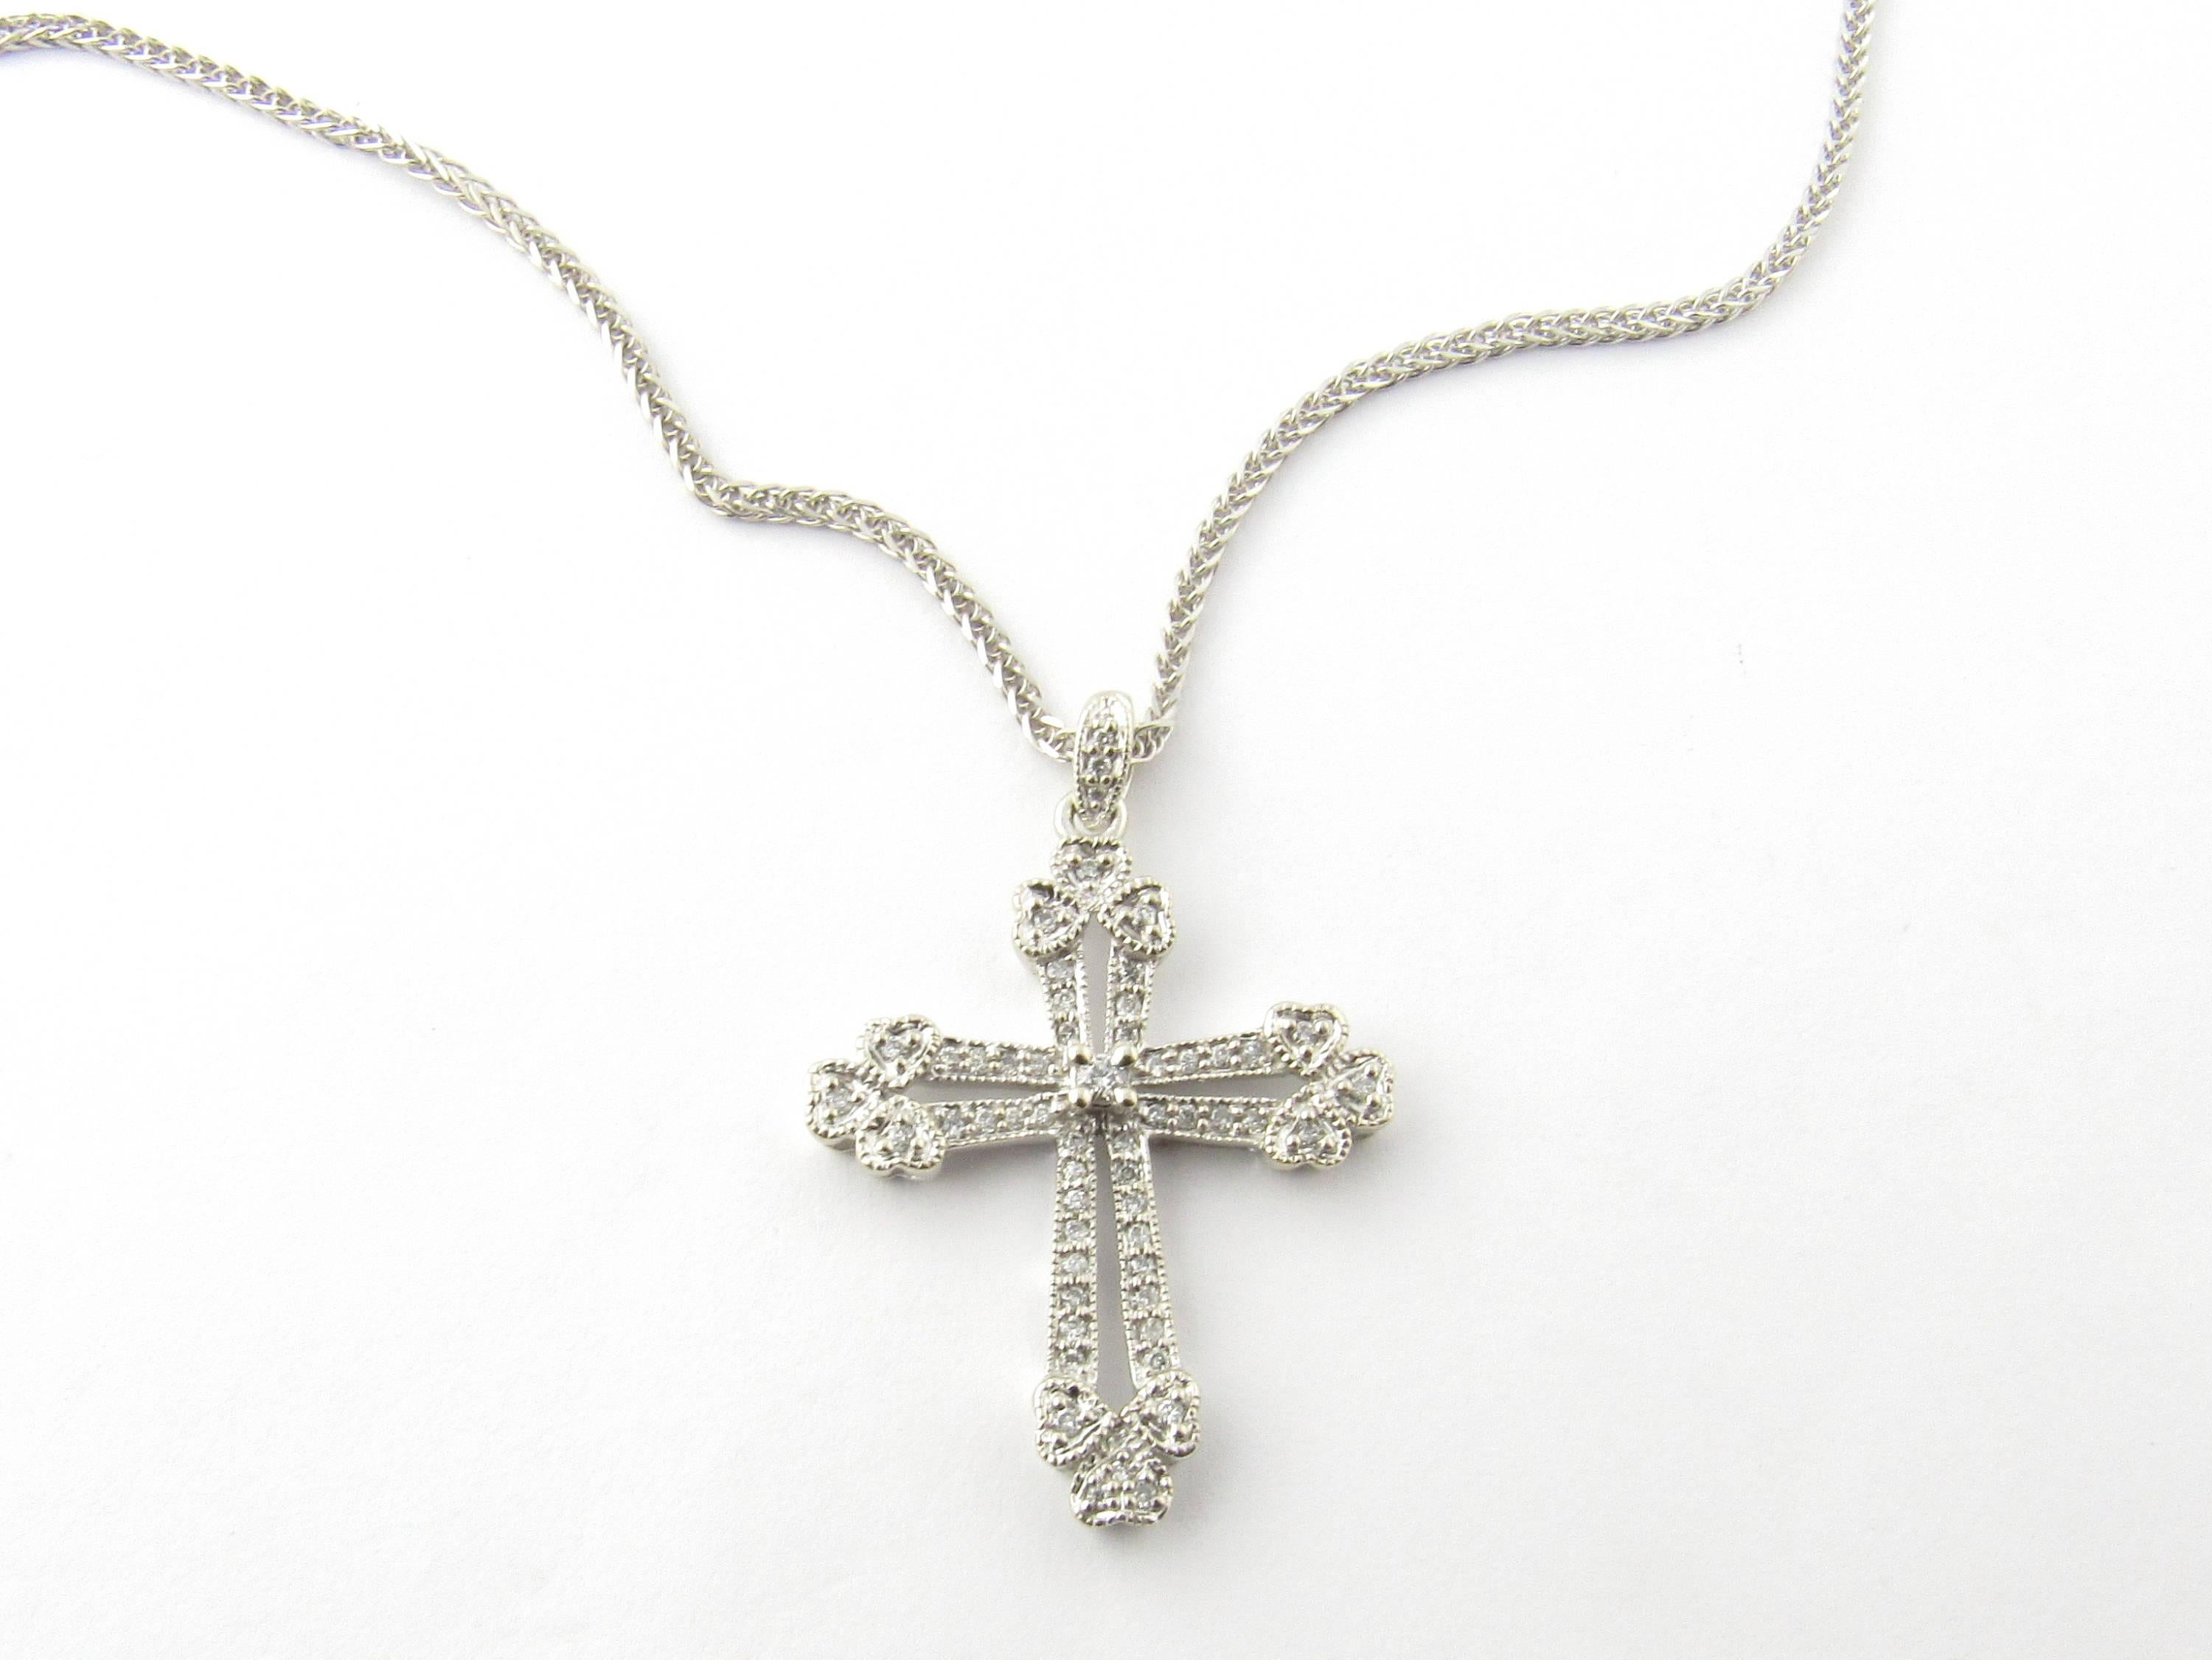 Vintage 14 Karat White Gold Diamond Cross Pendant Necklace-

This glittering diamond cross pendant (29 mm x 22 mm) features 54 round brilliant cut diamonds set in meticulously detailed 14K white gold. It hangs from a classic 14K white gold 20 inch